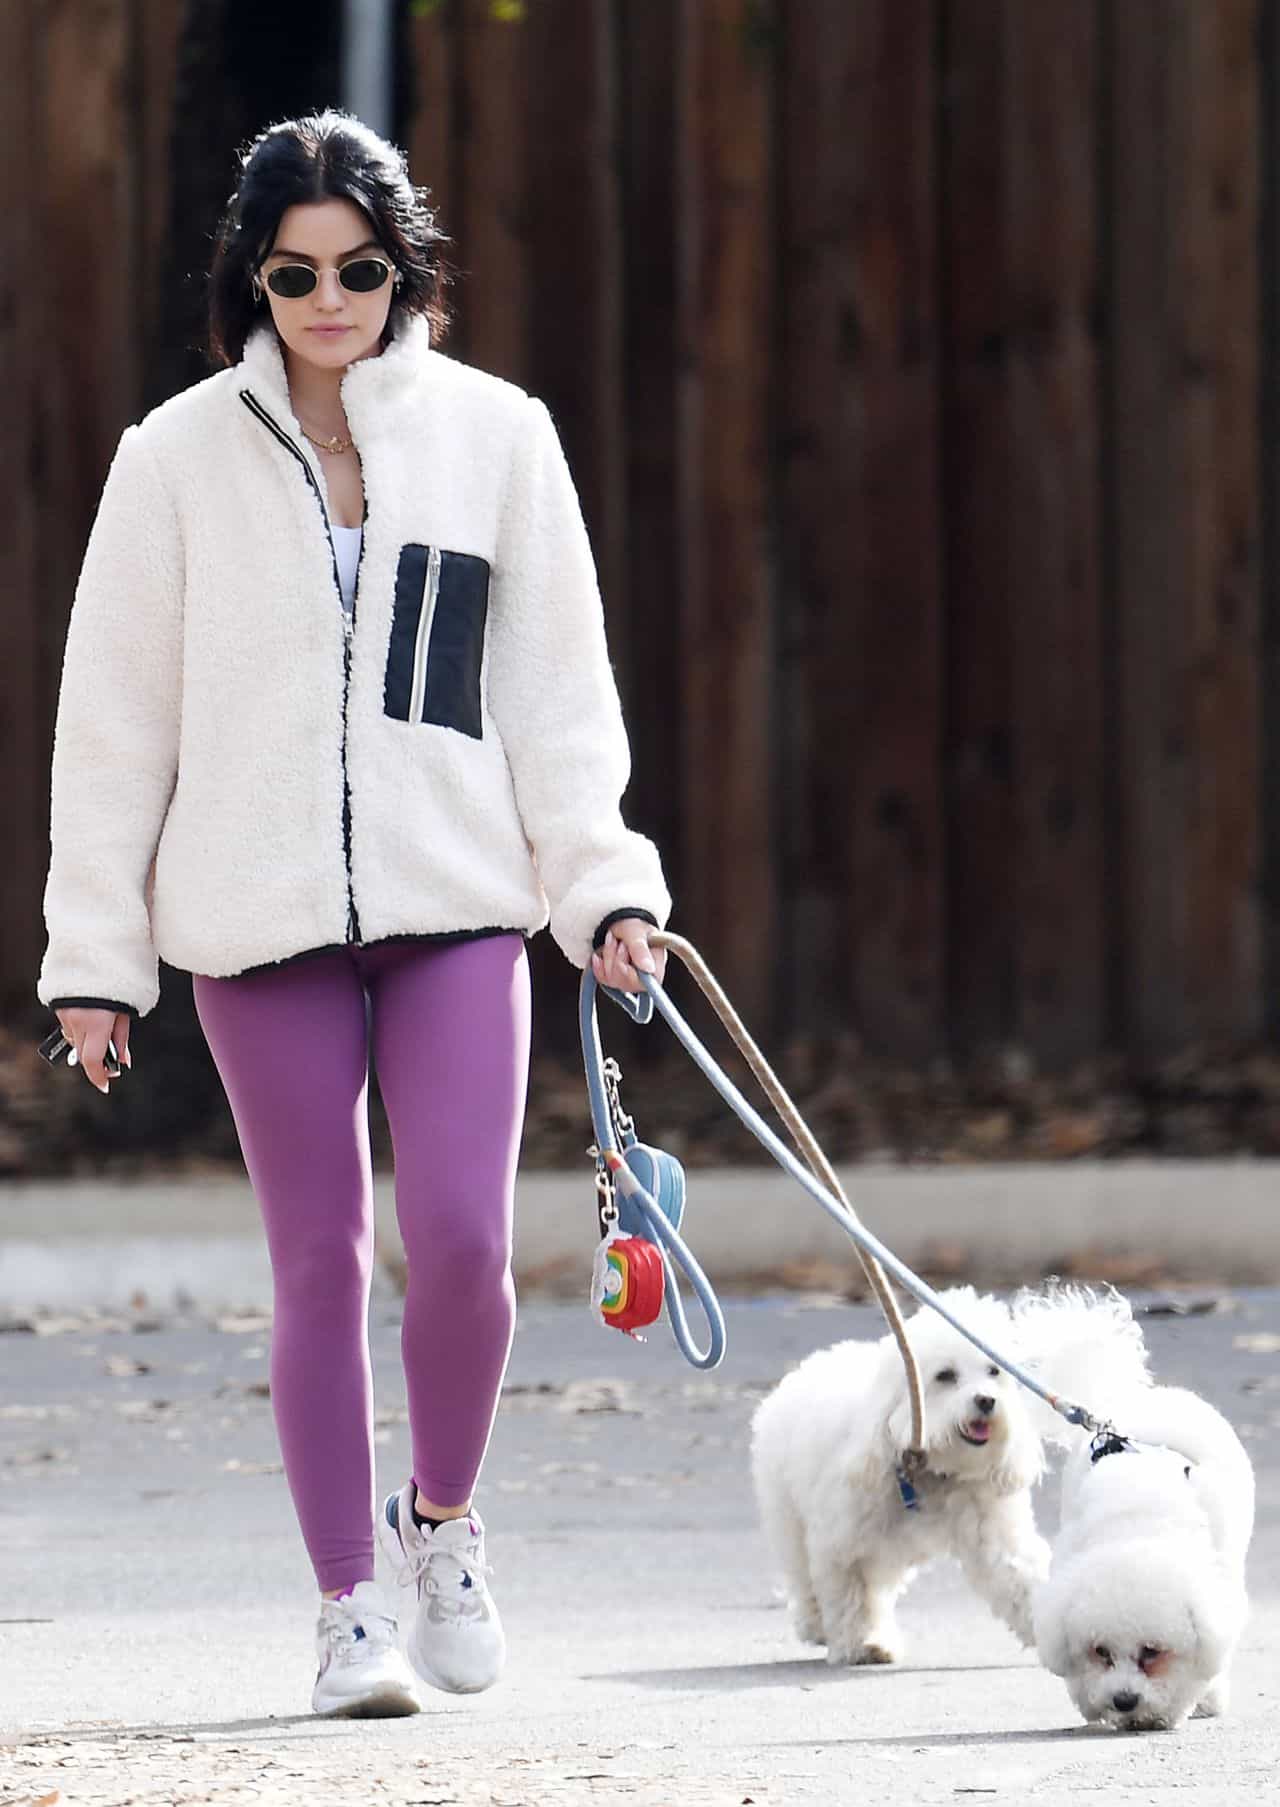 Lucy Hale Cuts a Relaxed Look as She Takes Her Dogs For a Walk in WeHo